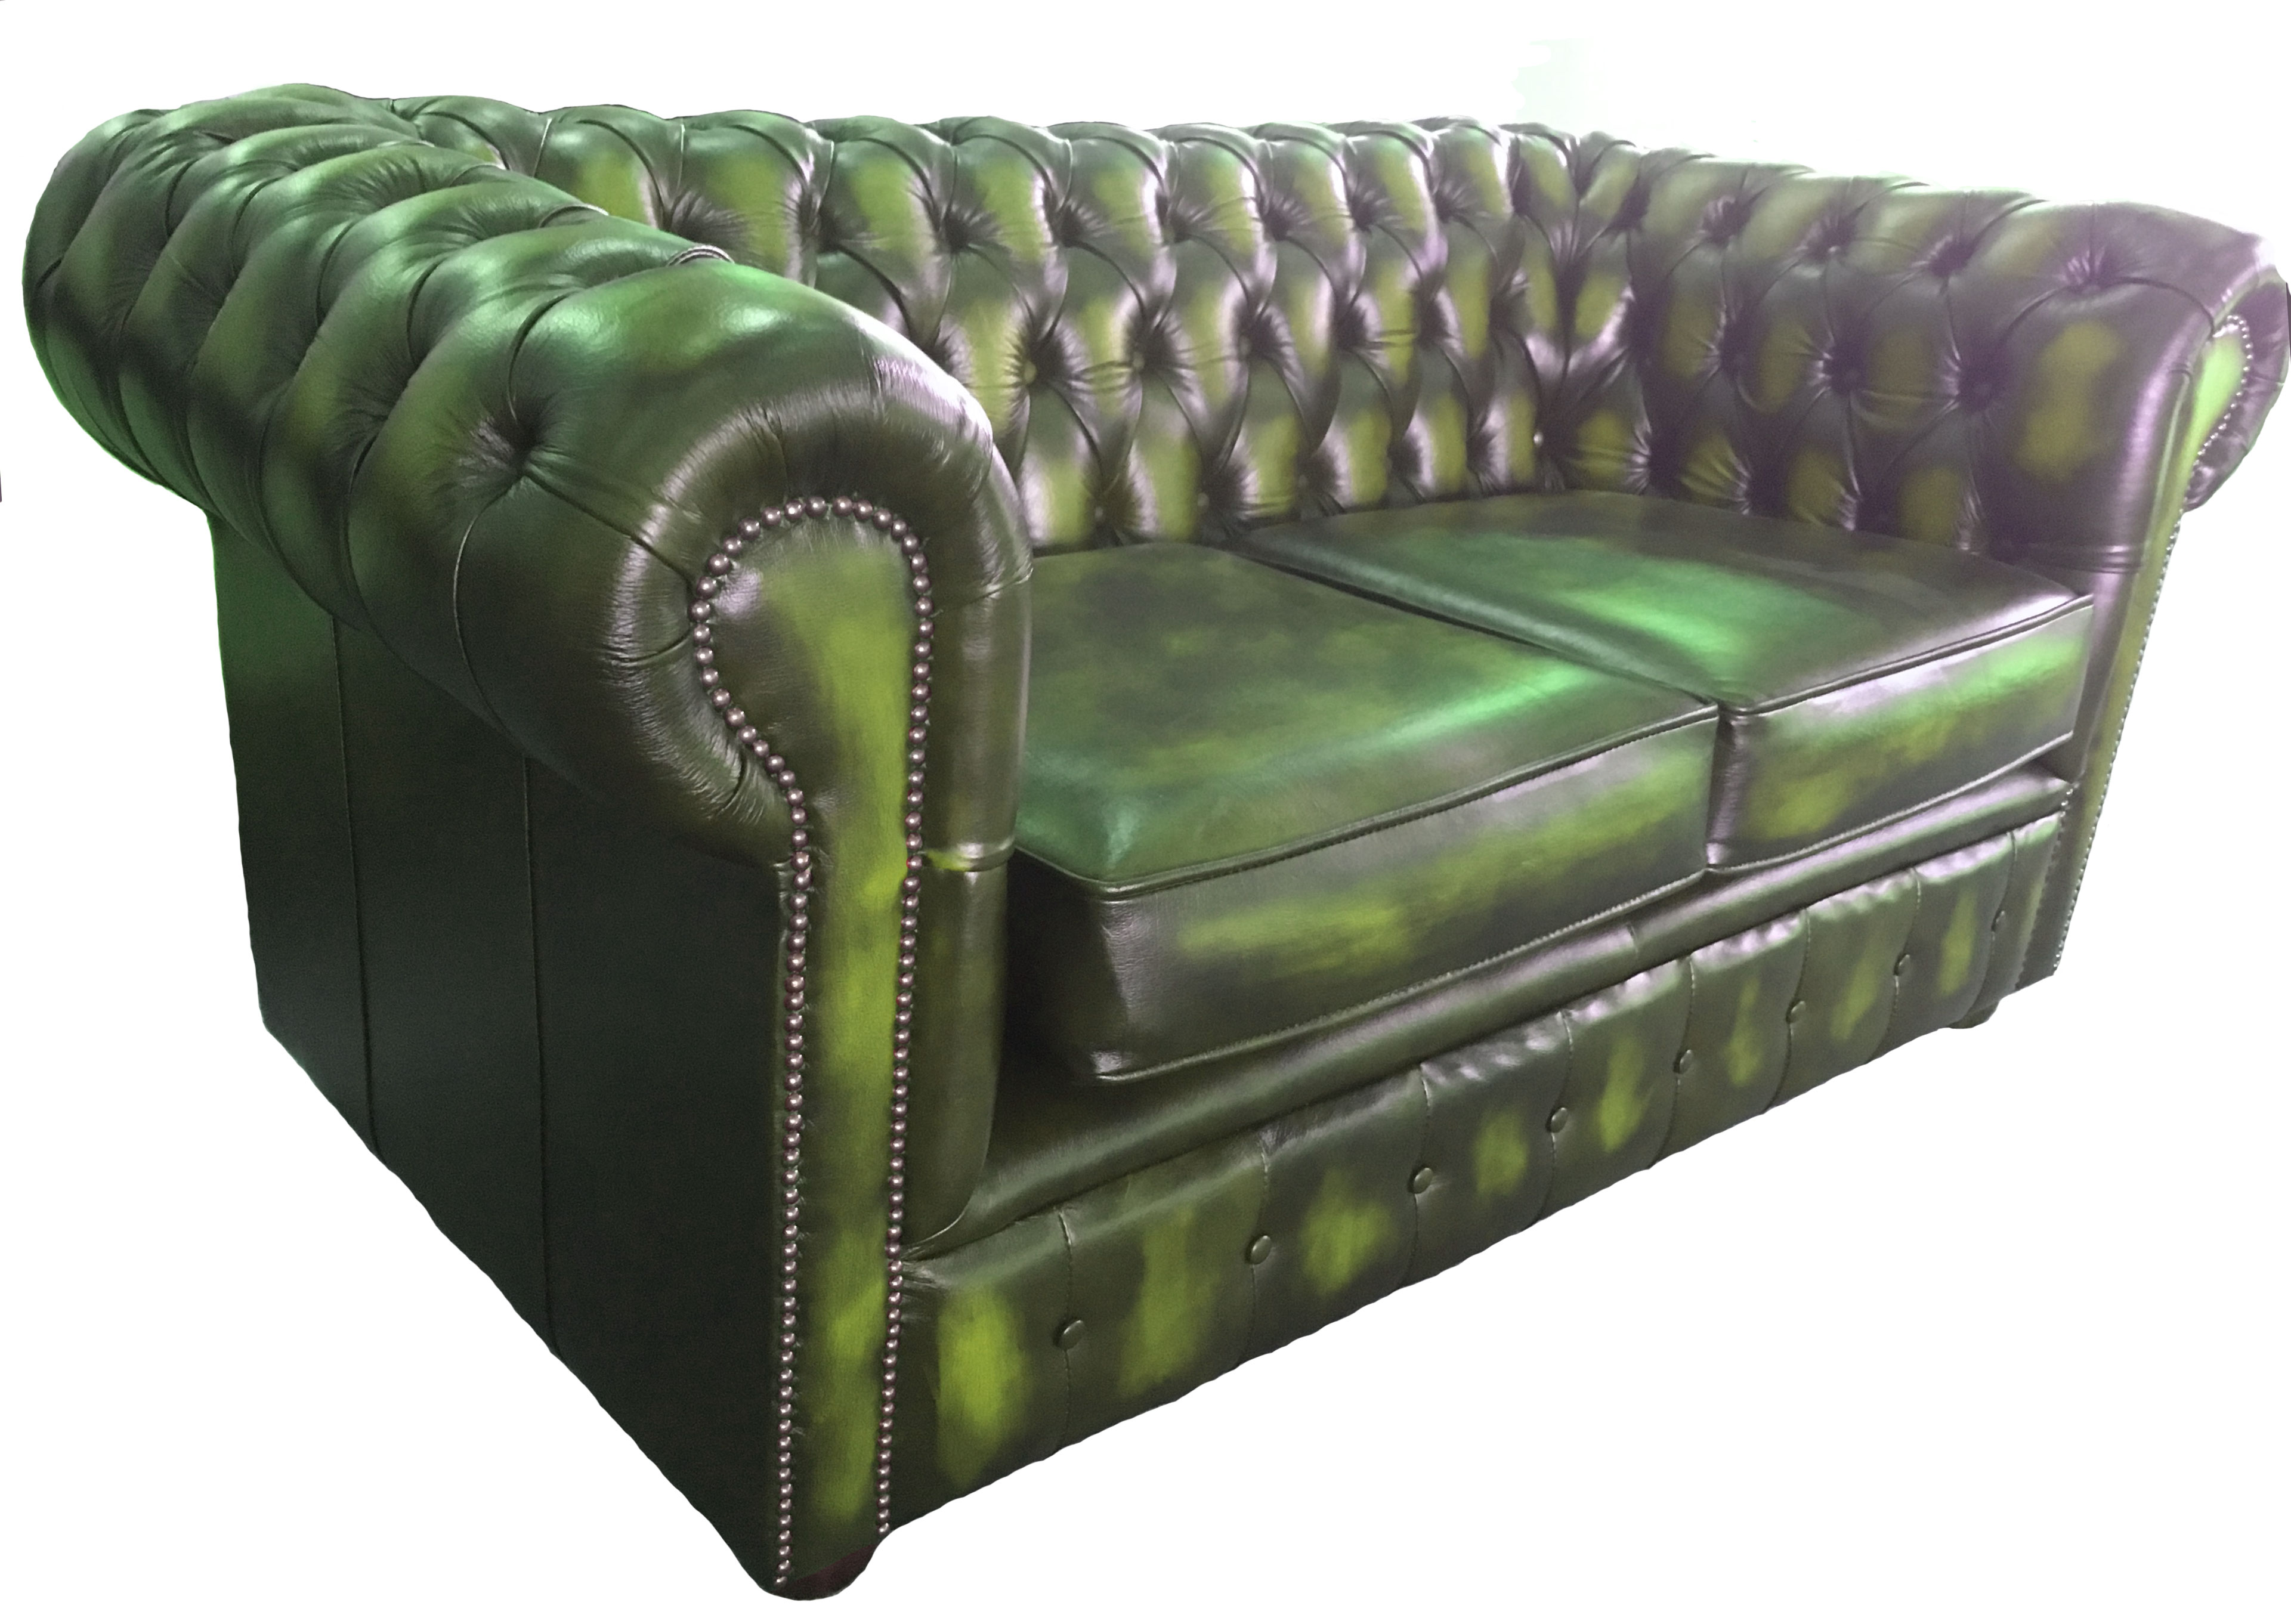 2 seater green leather chesterfield sofa